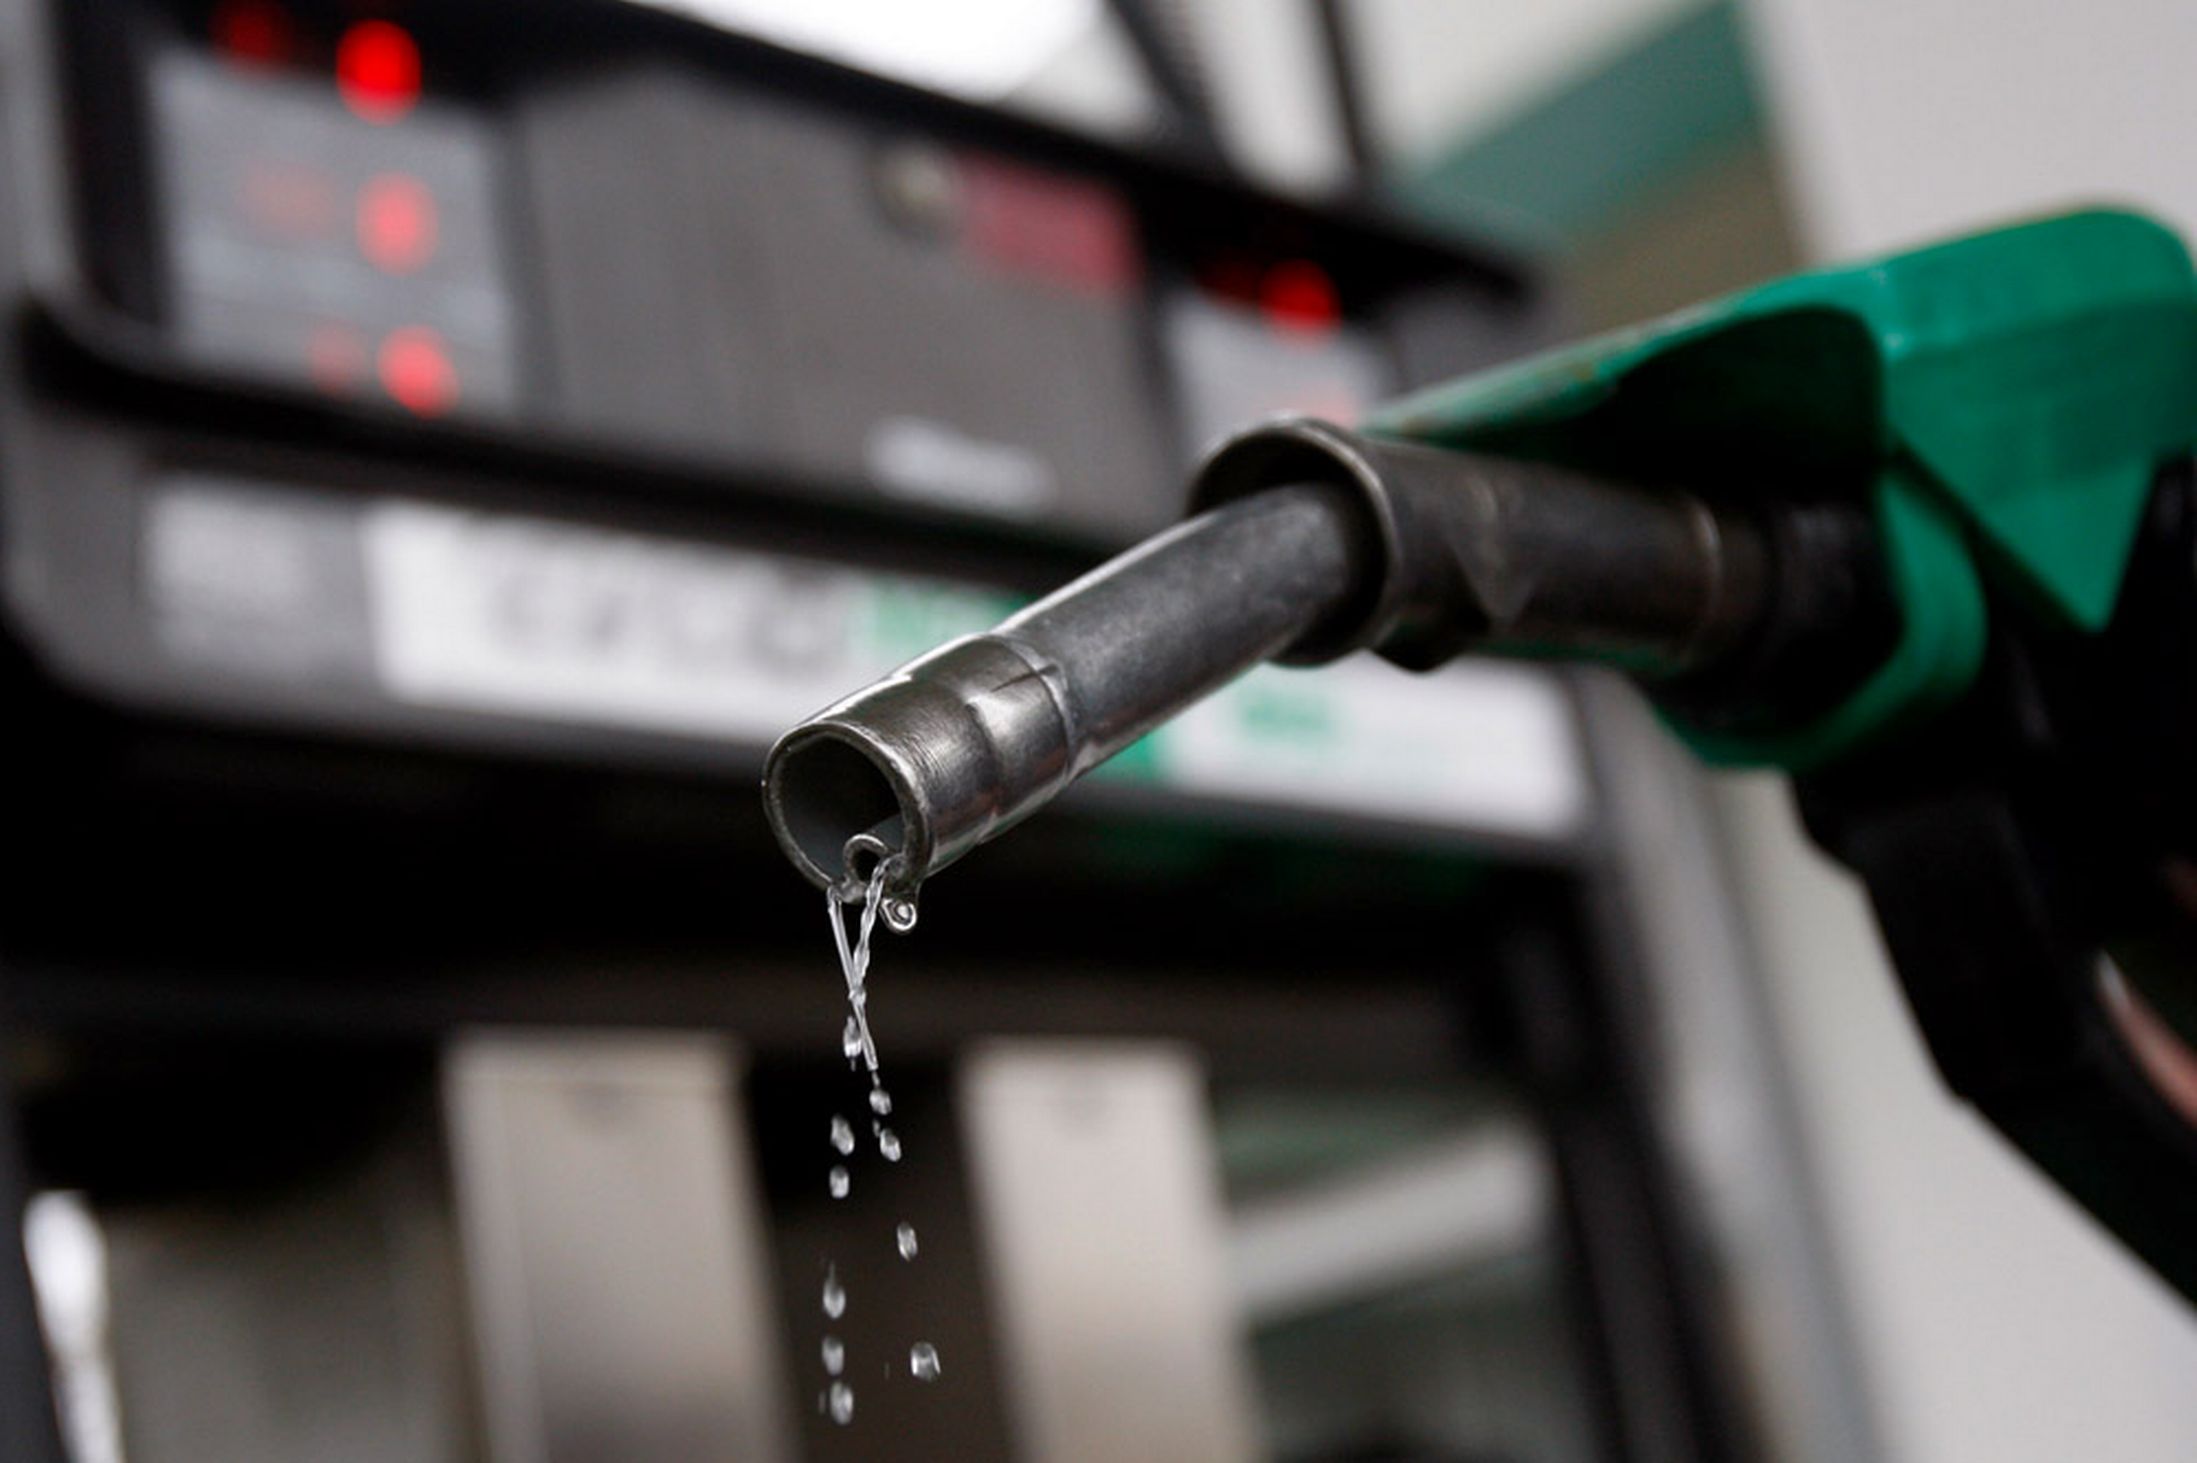 FG Denies Suspending The Elimination Of Gasoline Subsidy